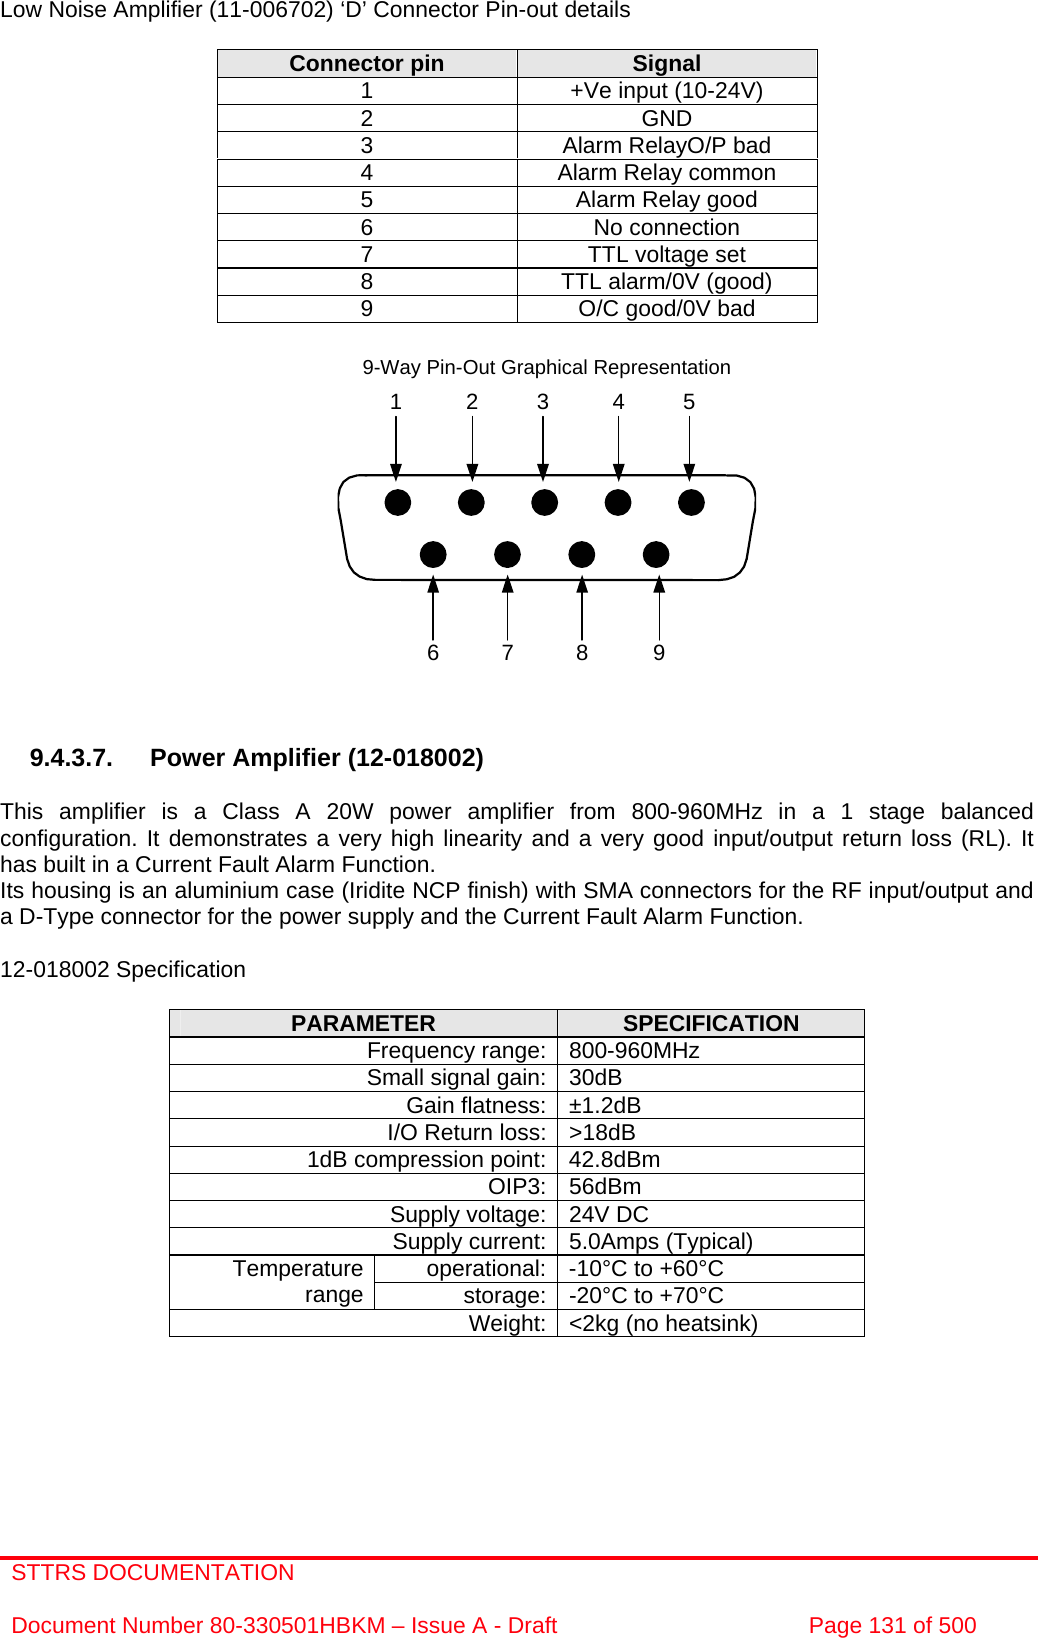 STTRS DOCUMENTATION  Document Number 80-330501HBKM – Issue A - Draft  Page 131 of 500  7 8 961 2 3 4 59-Way Pin-Out Graphical Representation Low Noise Amplifier (11-006702) ‘D’ Connector Pin-out details  Connector pin  Signal 1  +Ve input (10-24V) 2 GND 3  Alarm RelayO/P bad 4  Alarm Relay common 5  Alarm Relay good 6 No connection 7  TTL voltage set 8  TTL alarm/0V (good) 9  O/C good/0V bad                 9.4.3.7.  Power Amplifier (12-018002)  This amplifier is a Class A 20W power amplifier from 800-960MHz in a 1 stage balanced configuration. It demonstrates a very high linearity and a very good input/output return loss (RL). It has built in a Current Fault Alarm Function. Its housing is an aluminium case (Iridite NCP finish) with SMA connectors for the RF input/output and a D-Type connector for the power supply and the Current Fault Alarm Function.  12-018002 Specification  PARAMETER  SPECIFICATION Frequency range: 800-960MHz Small signal gain: 30dB Gain flatness: ±1.2dB I/O Return loss: &gt;18dB 1dB compression point: 42.8dBm OIP3: 56dBm Supply voltage: 24V DC Supply current: 5.0Amps (Typical) operational: -10°C to +60°C Temperature range  storage: -20°C to +70°C Weight: &lt;2kg (no heatsink)  